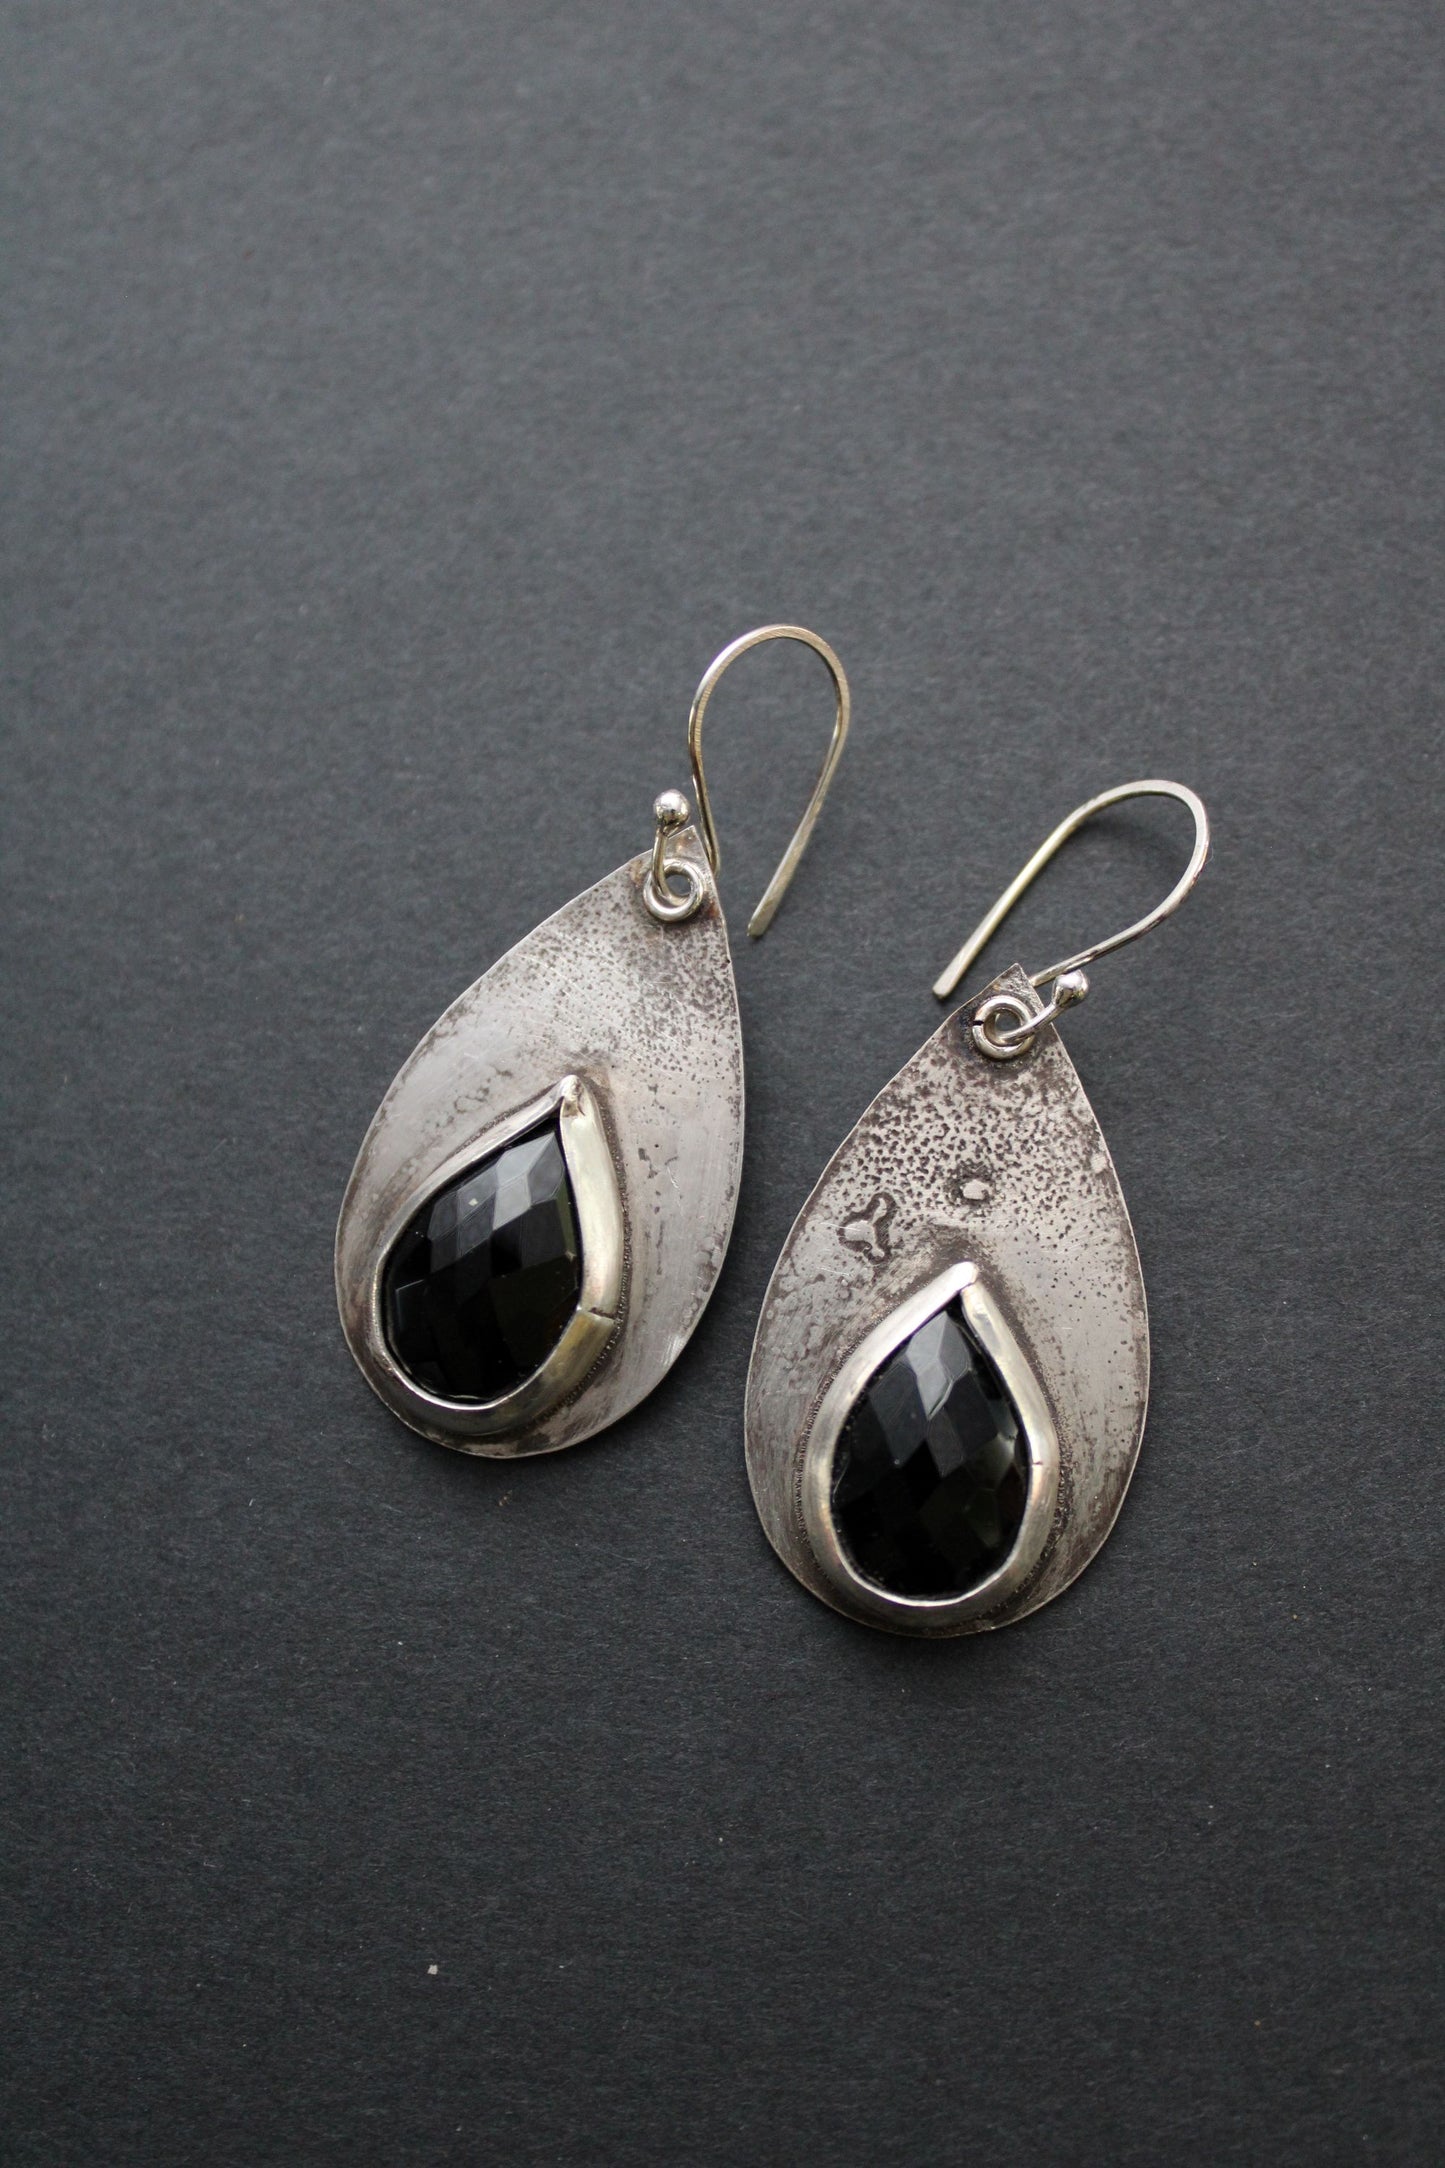 Reticulated Sterling Silver and Onyx Earrings